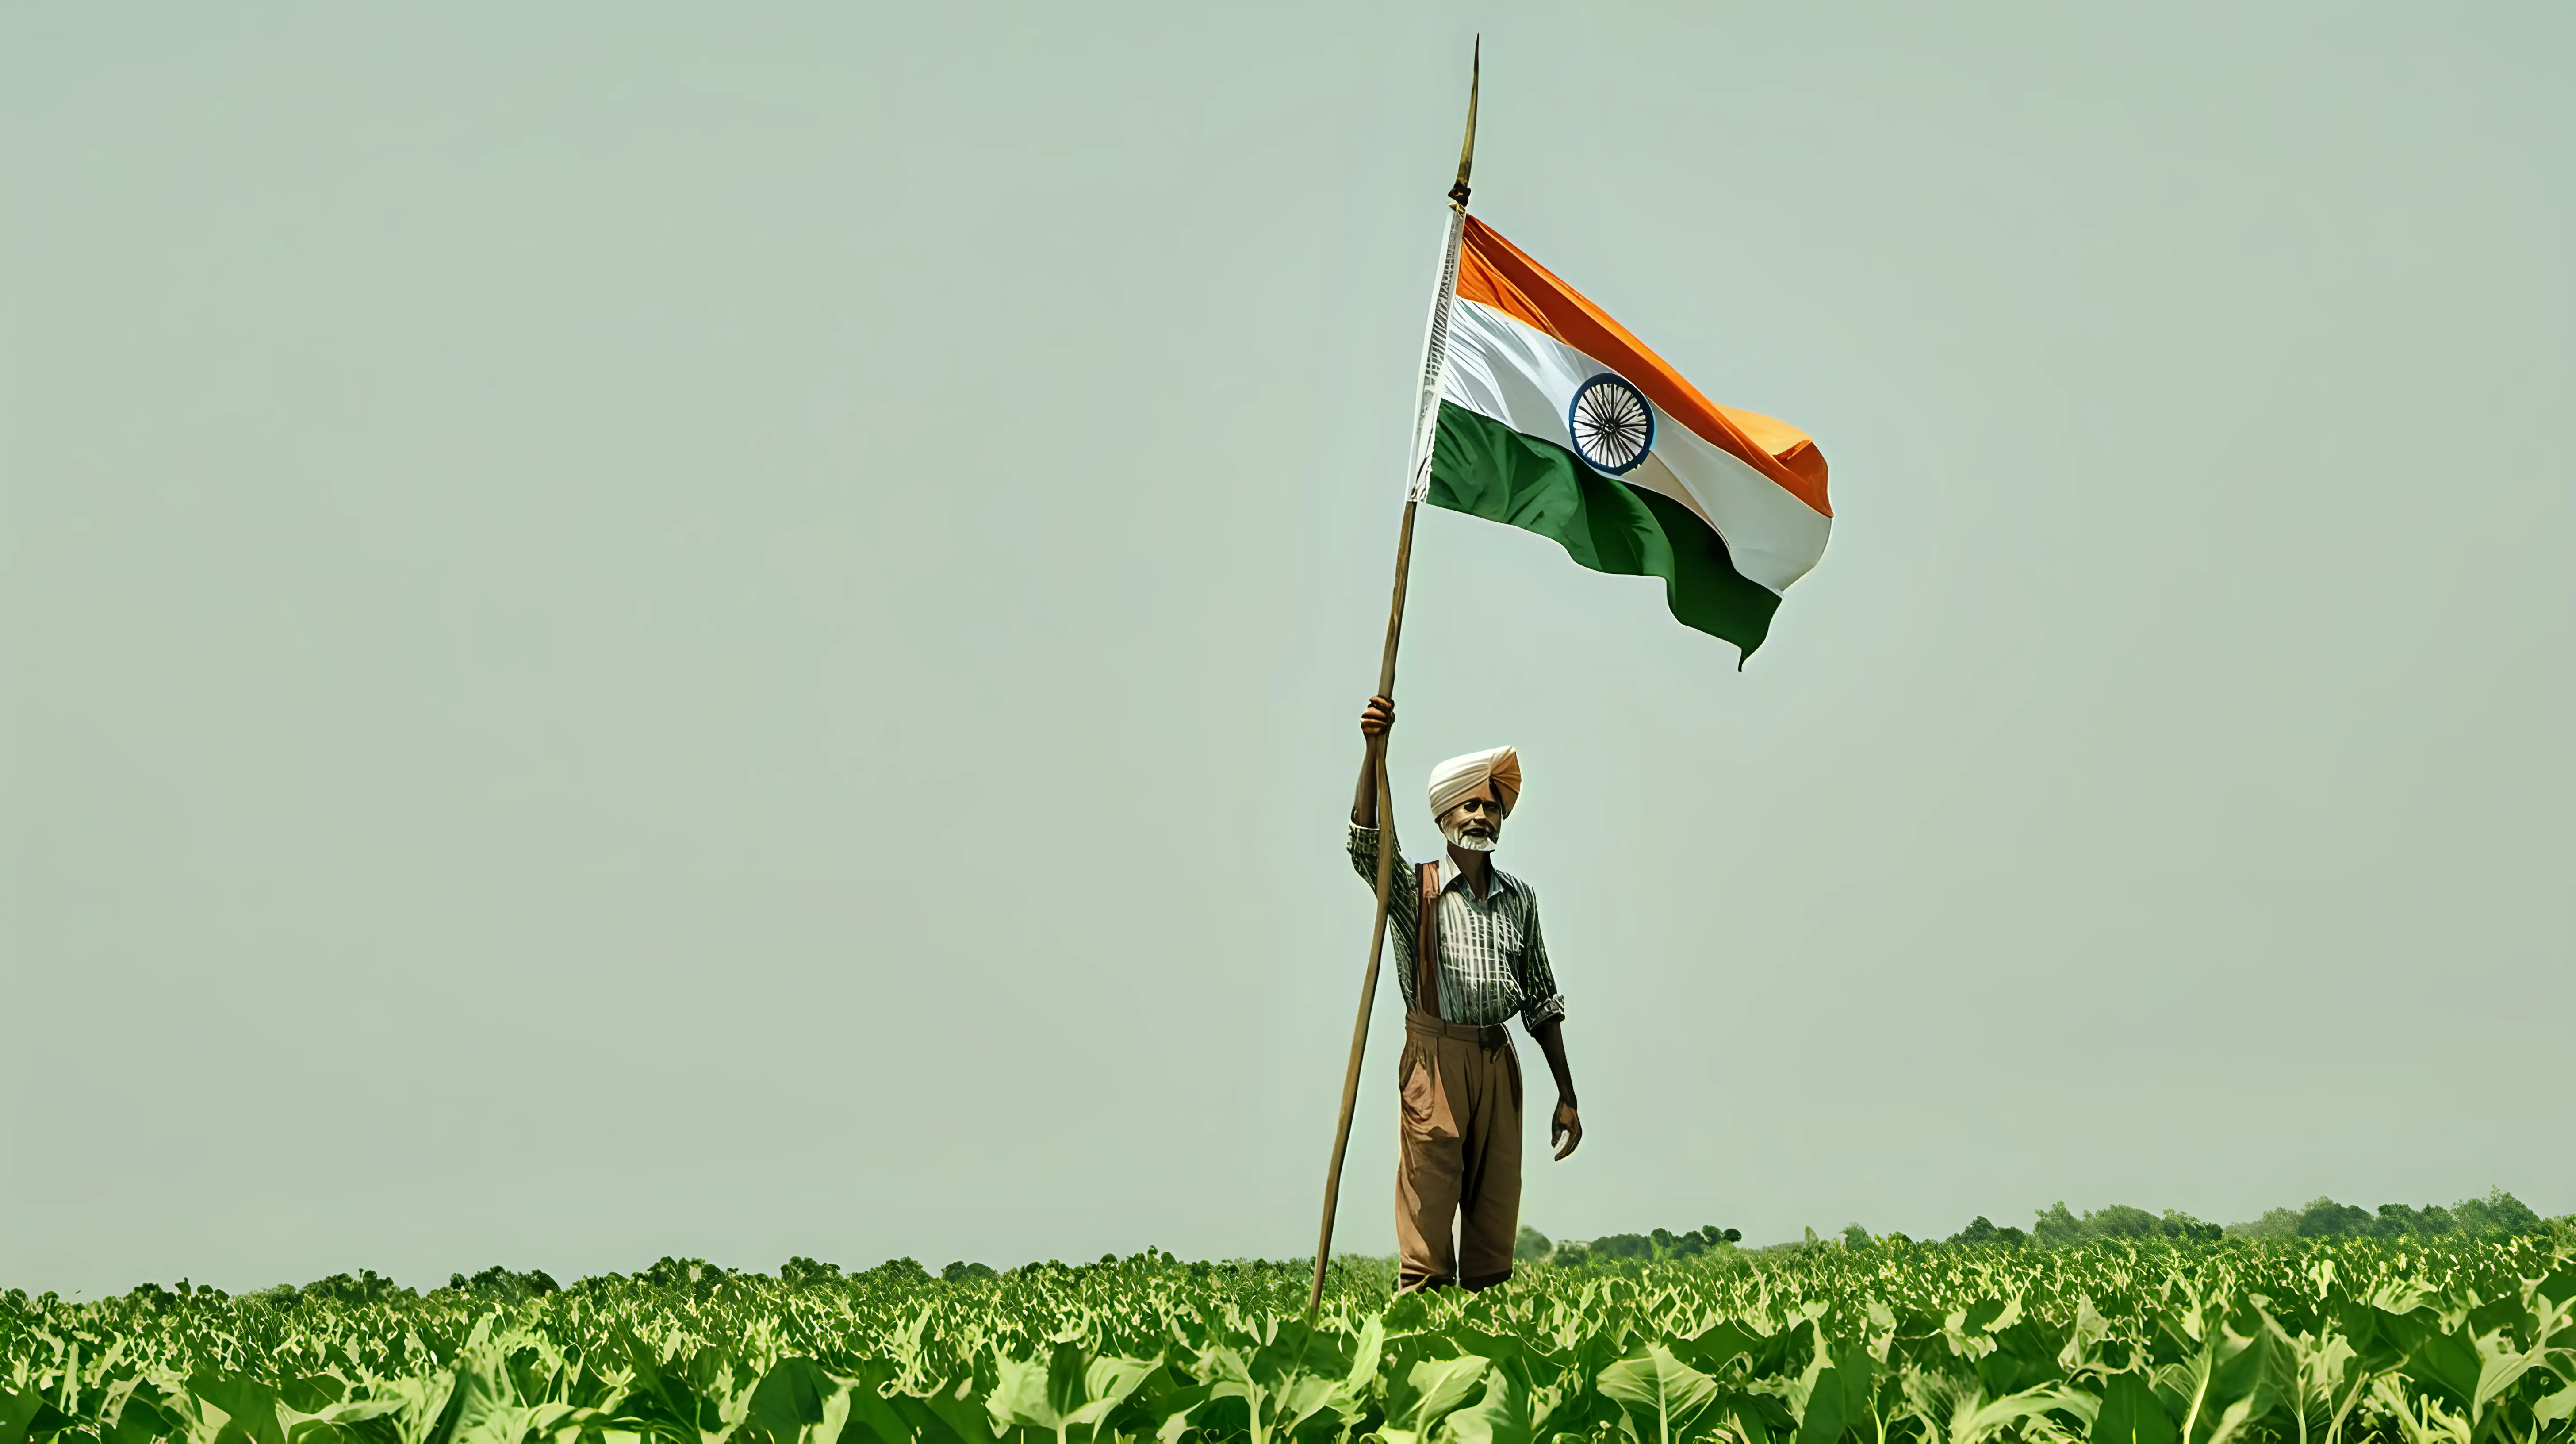 Indian Farmer Proudly Raising National Flag in Bountiful Fields